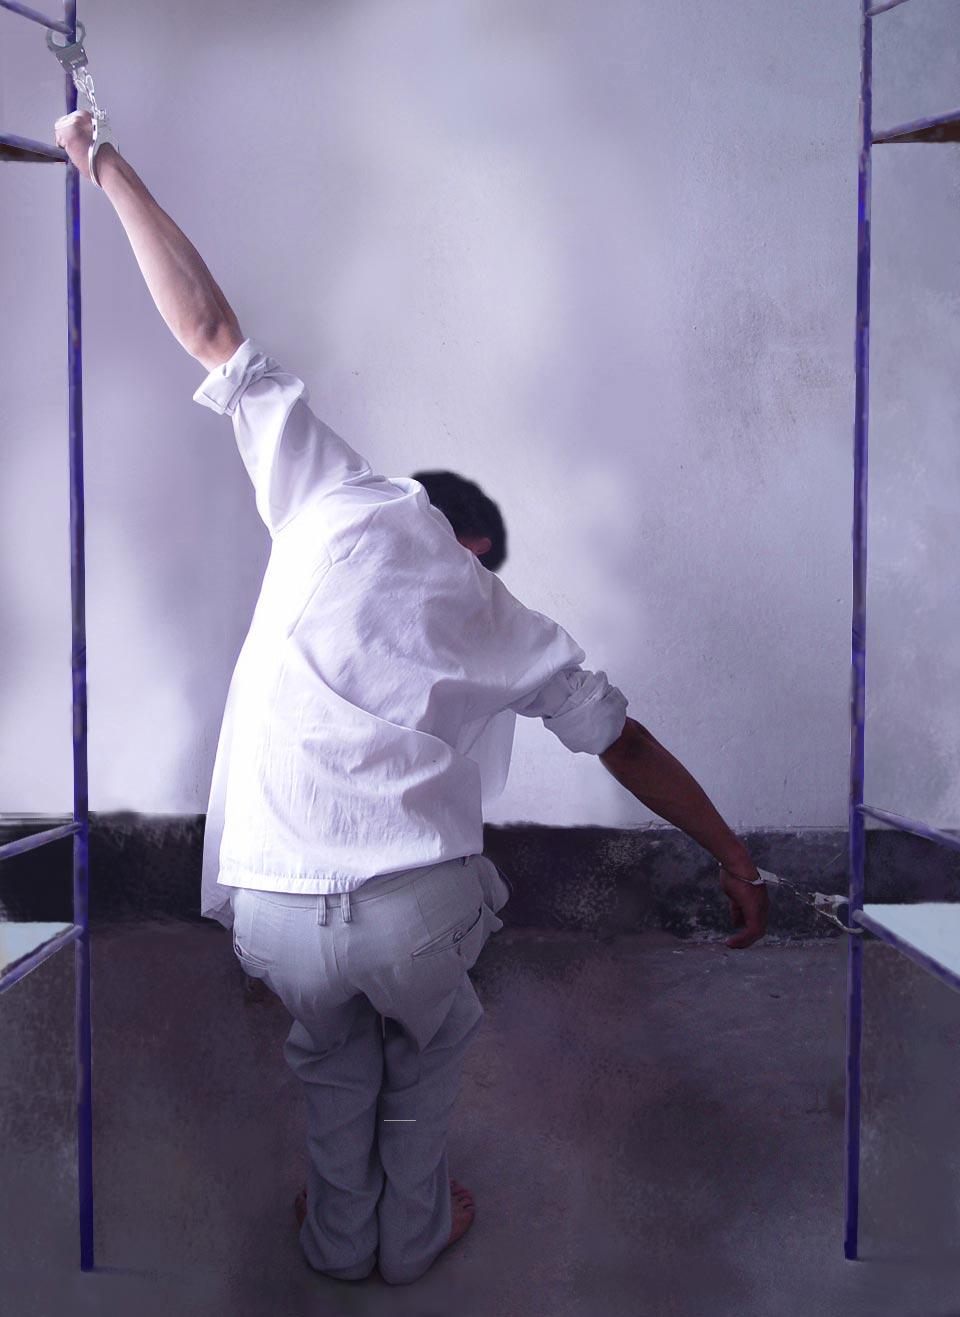 Cuffing to a bed: A reenactment of a torture method employed by the CCP to coerce Falun Gong adherents to give up their faith. (<a href="https://en.minghui.org/">Minghui.org</a>)